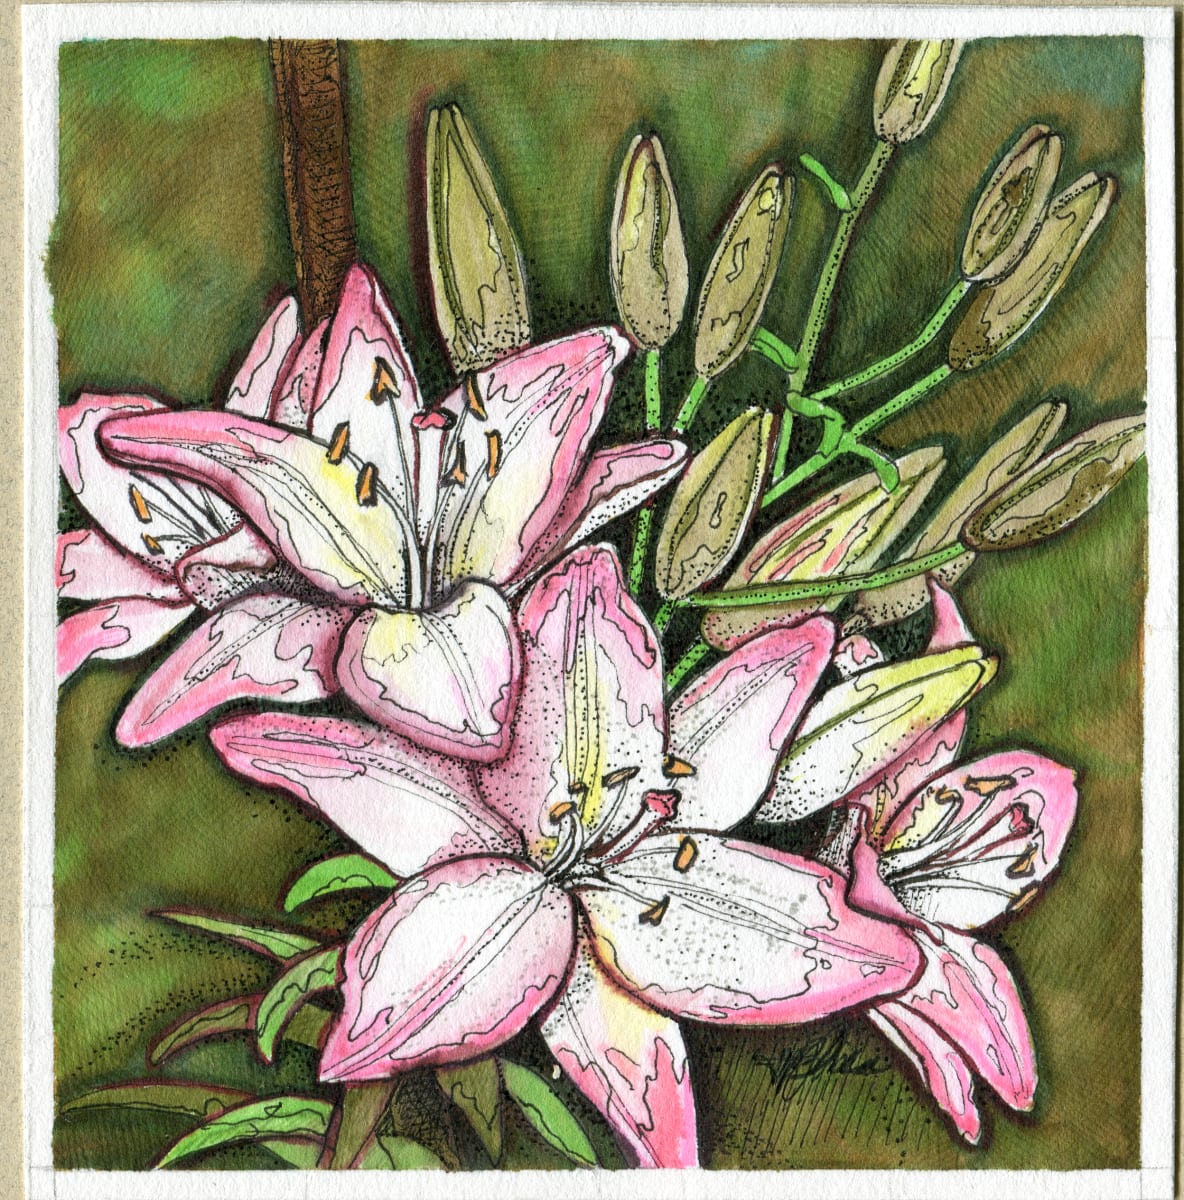 Summer Lilies by Julie Peterson Shea  Image: Each summer I look forward to the lilies blooming next to my house.